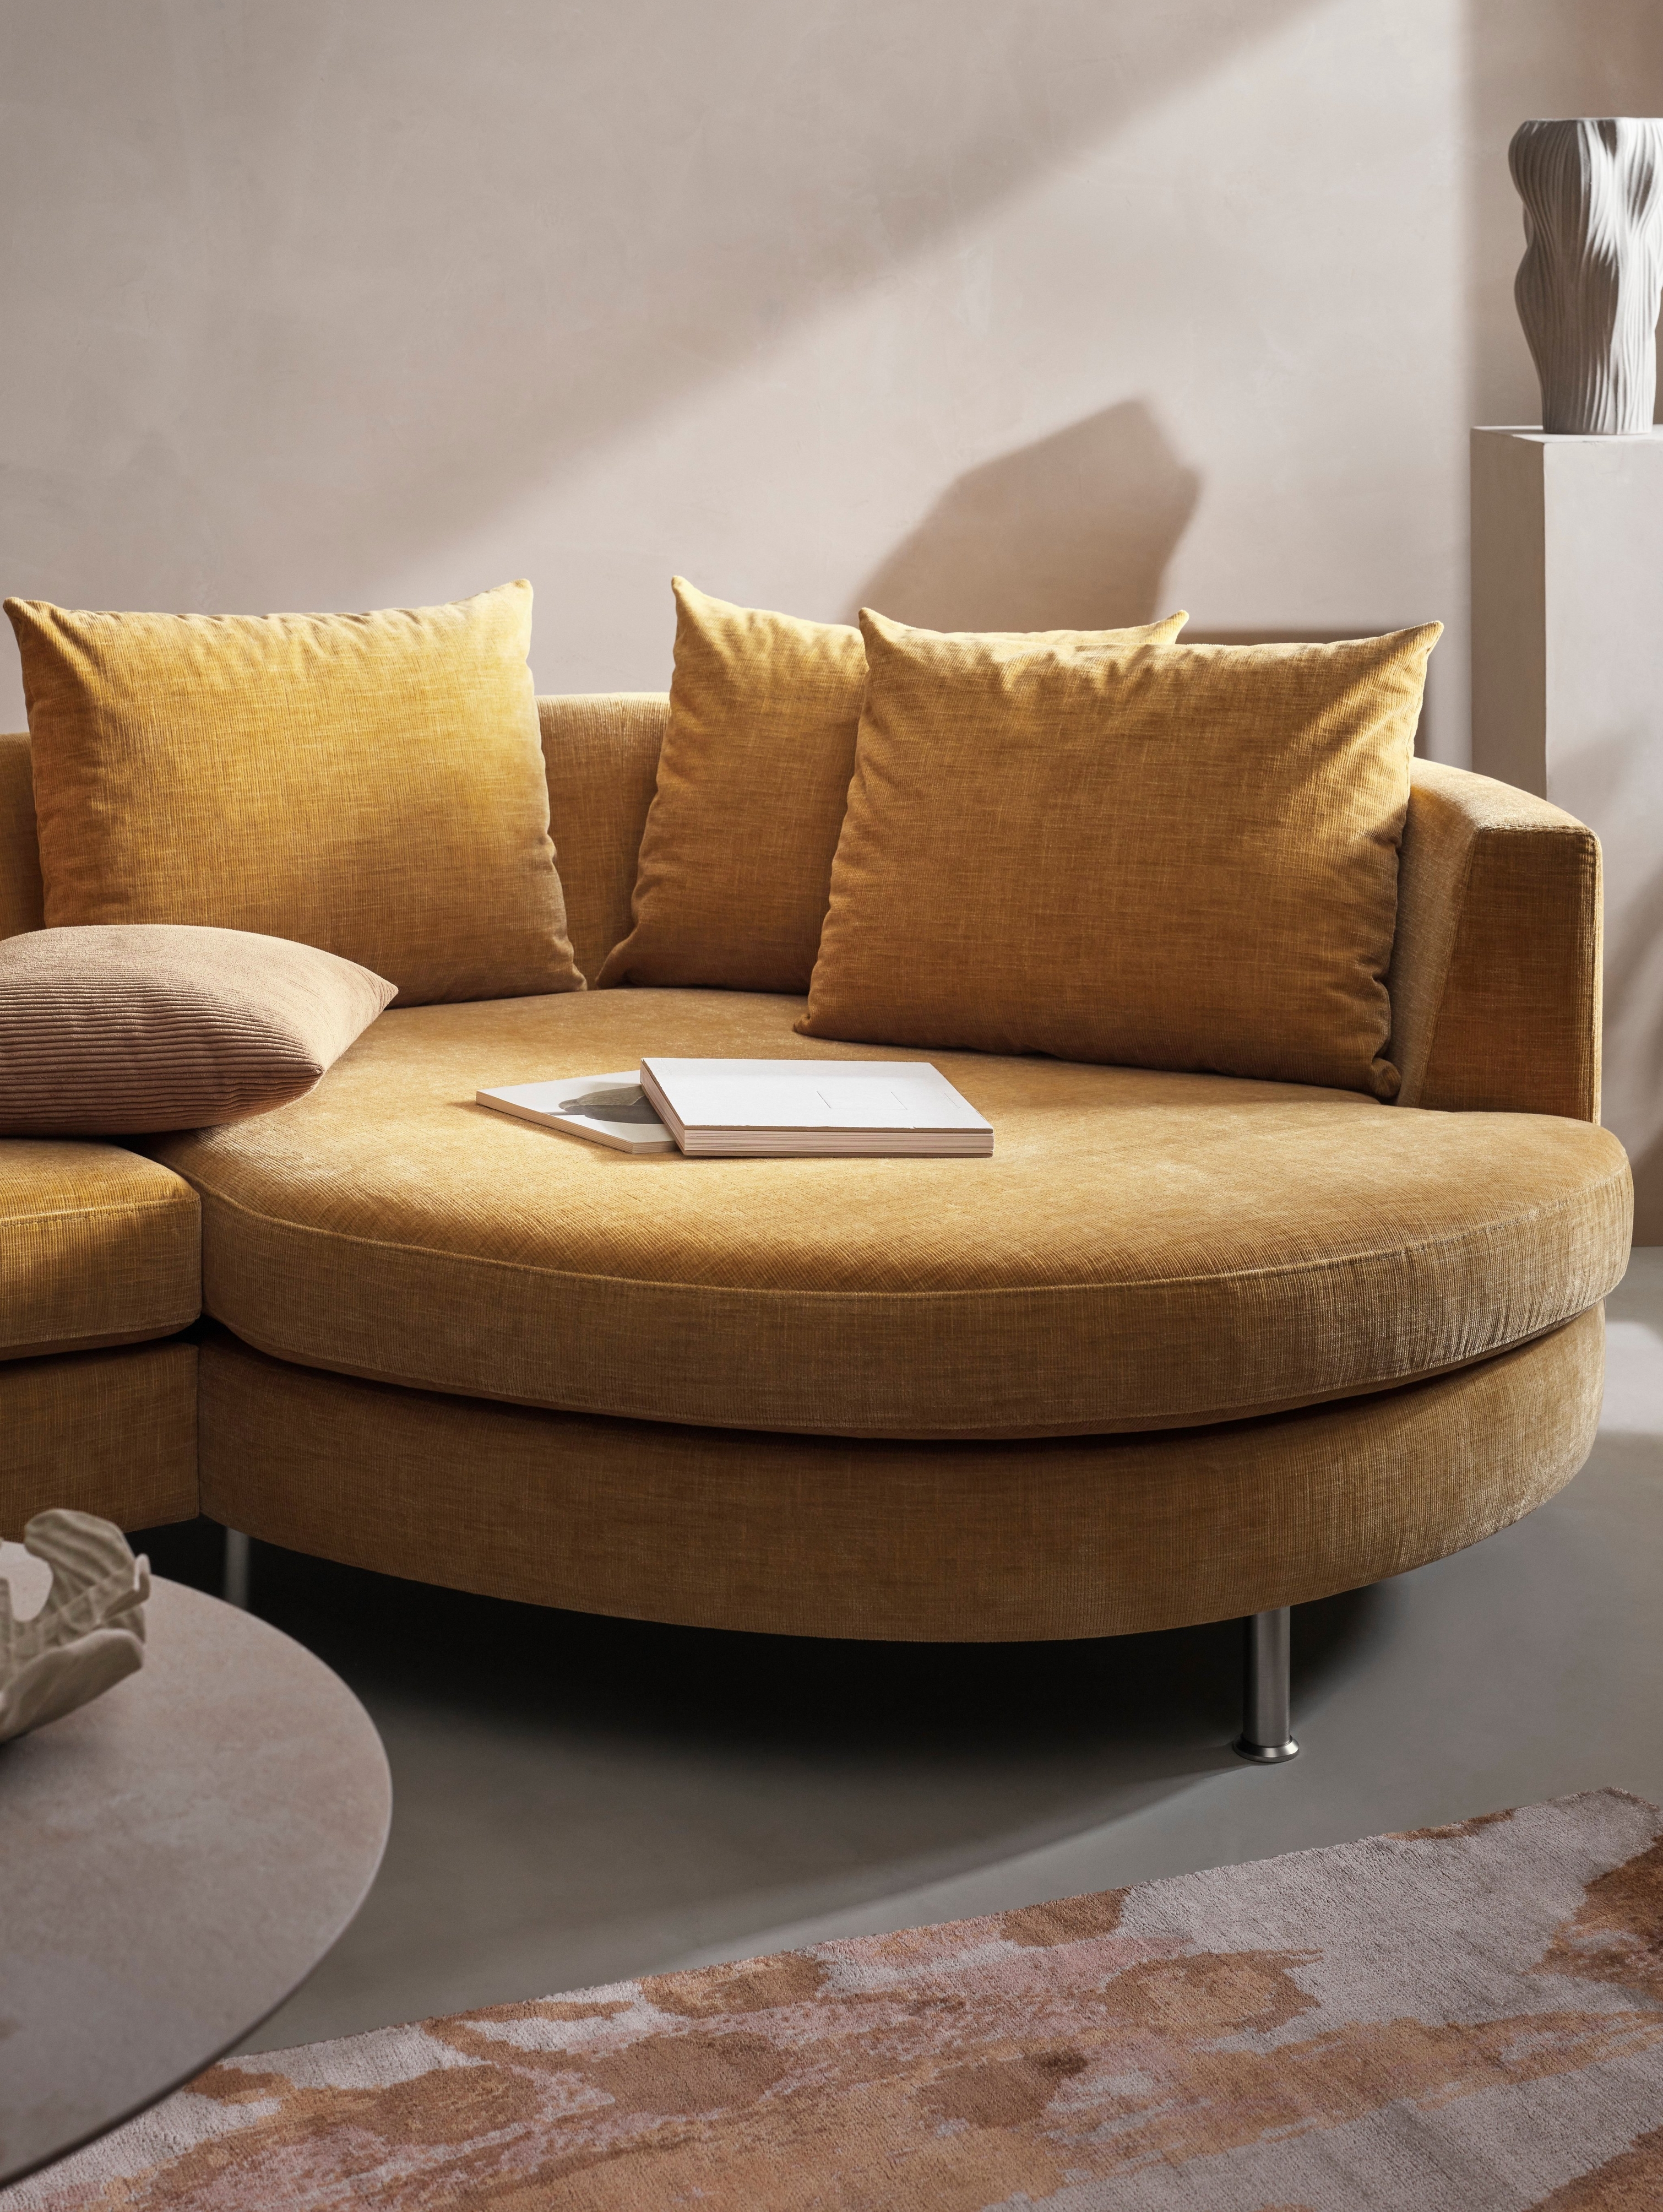 The Indivi sofa round resting unit, perfect for relaxing after work.